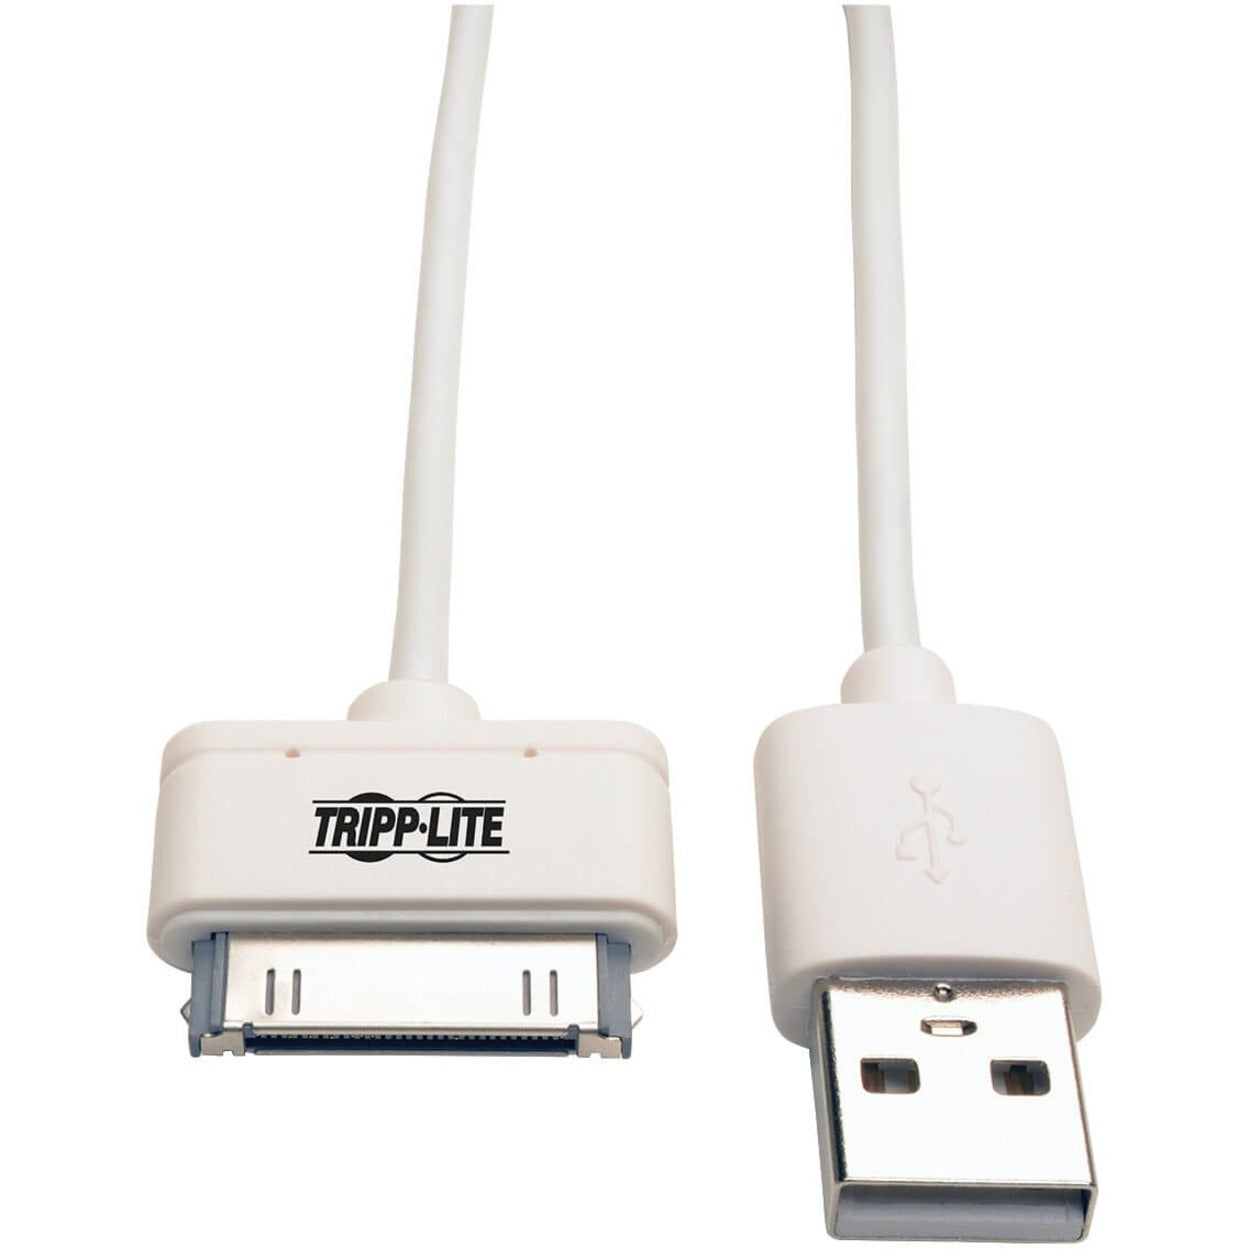 Tripp Lite M110-003-WH USB Sync/Charge Cable with Apple 30-Pin Dock Connector, White, 3 ft. (1 m)